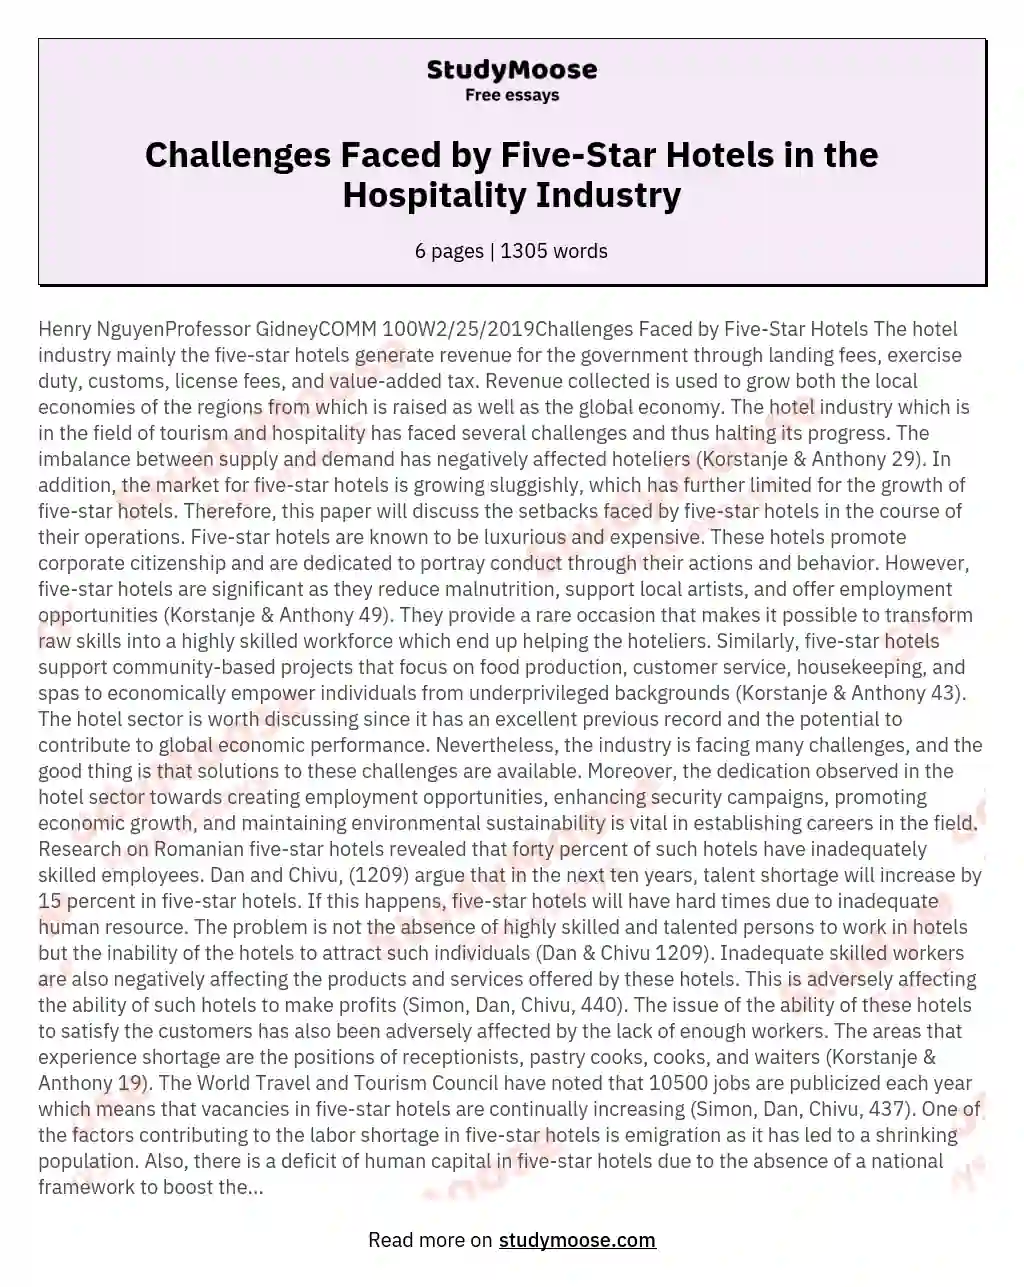 Challenges Faced by Five-Star Hotels in the Hospitality Industry essay